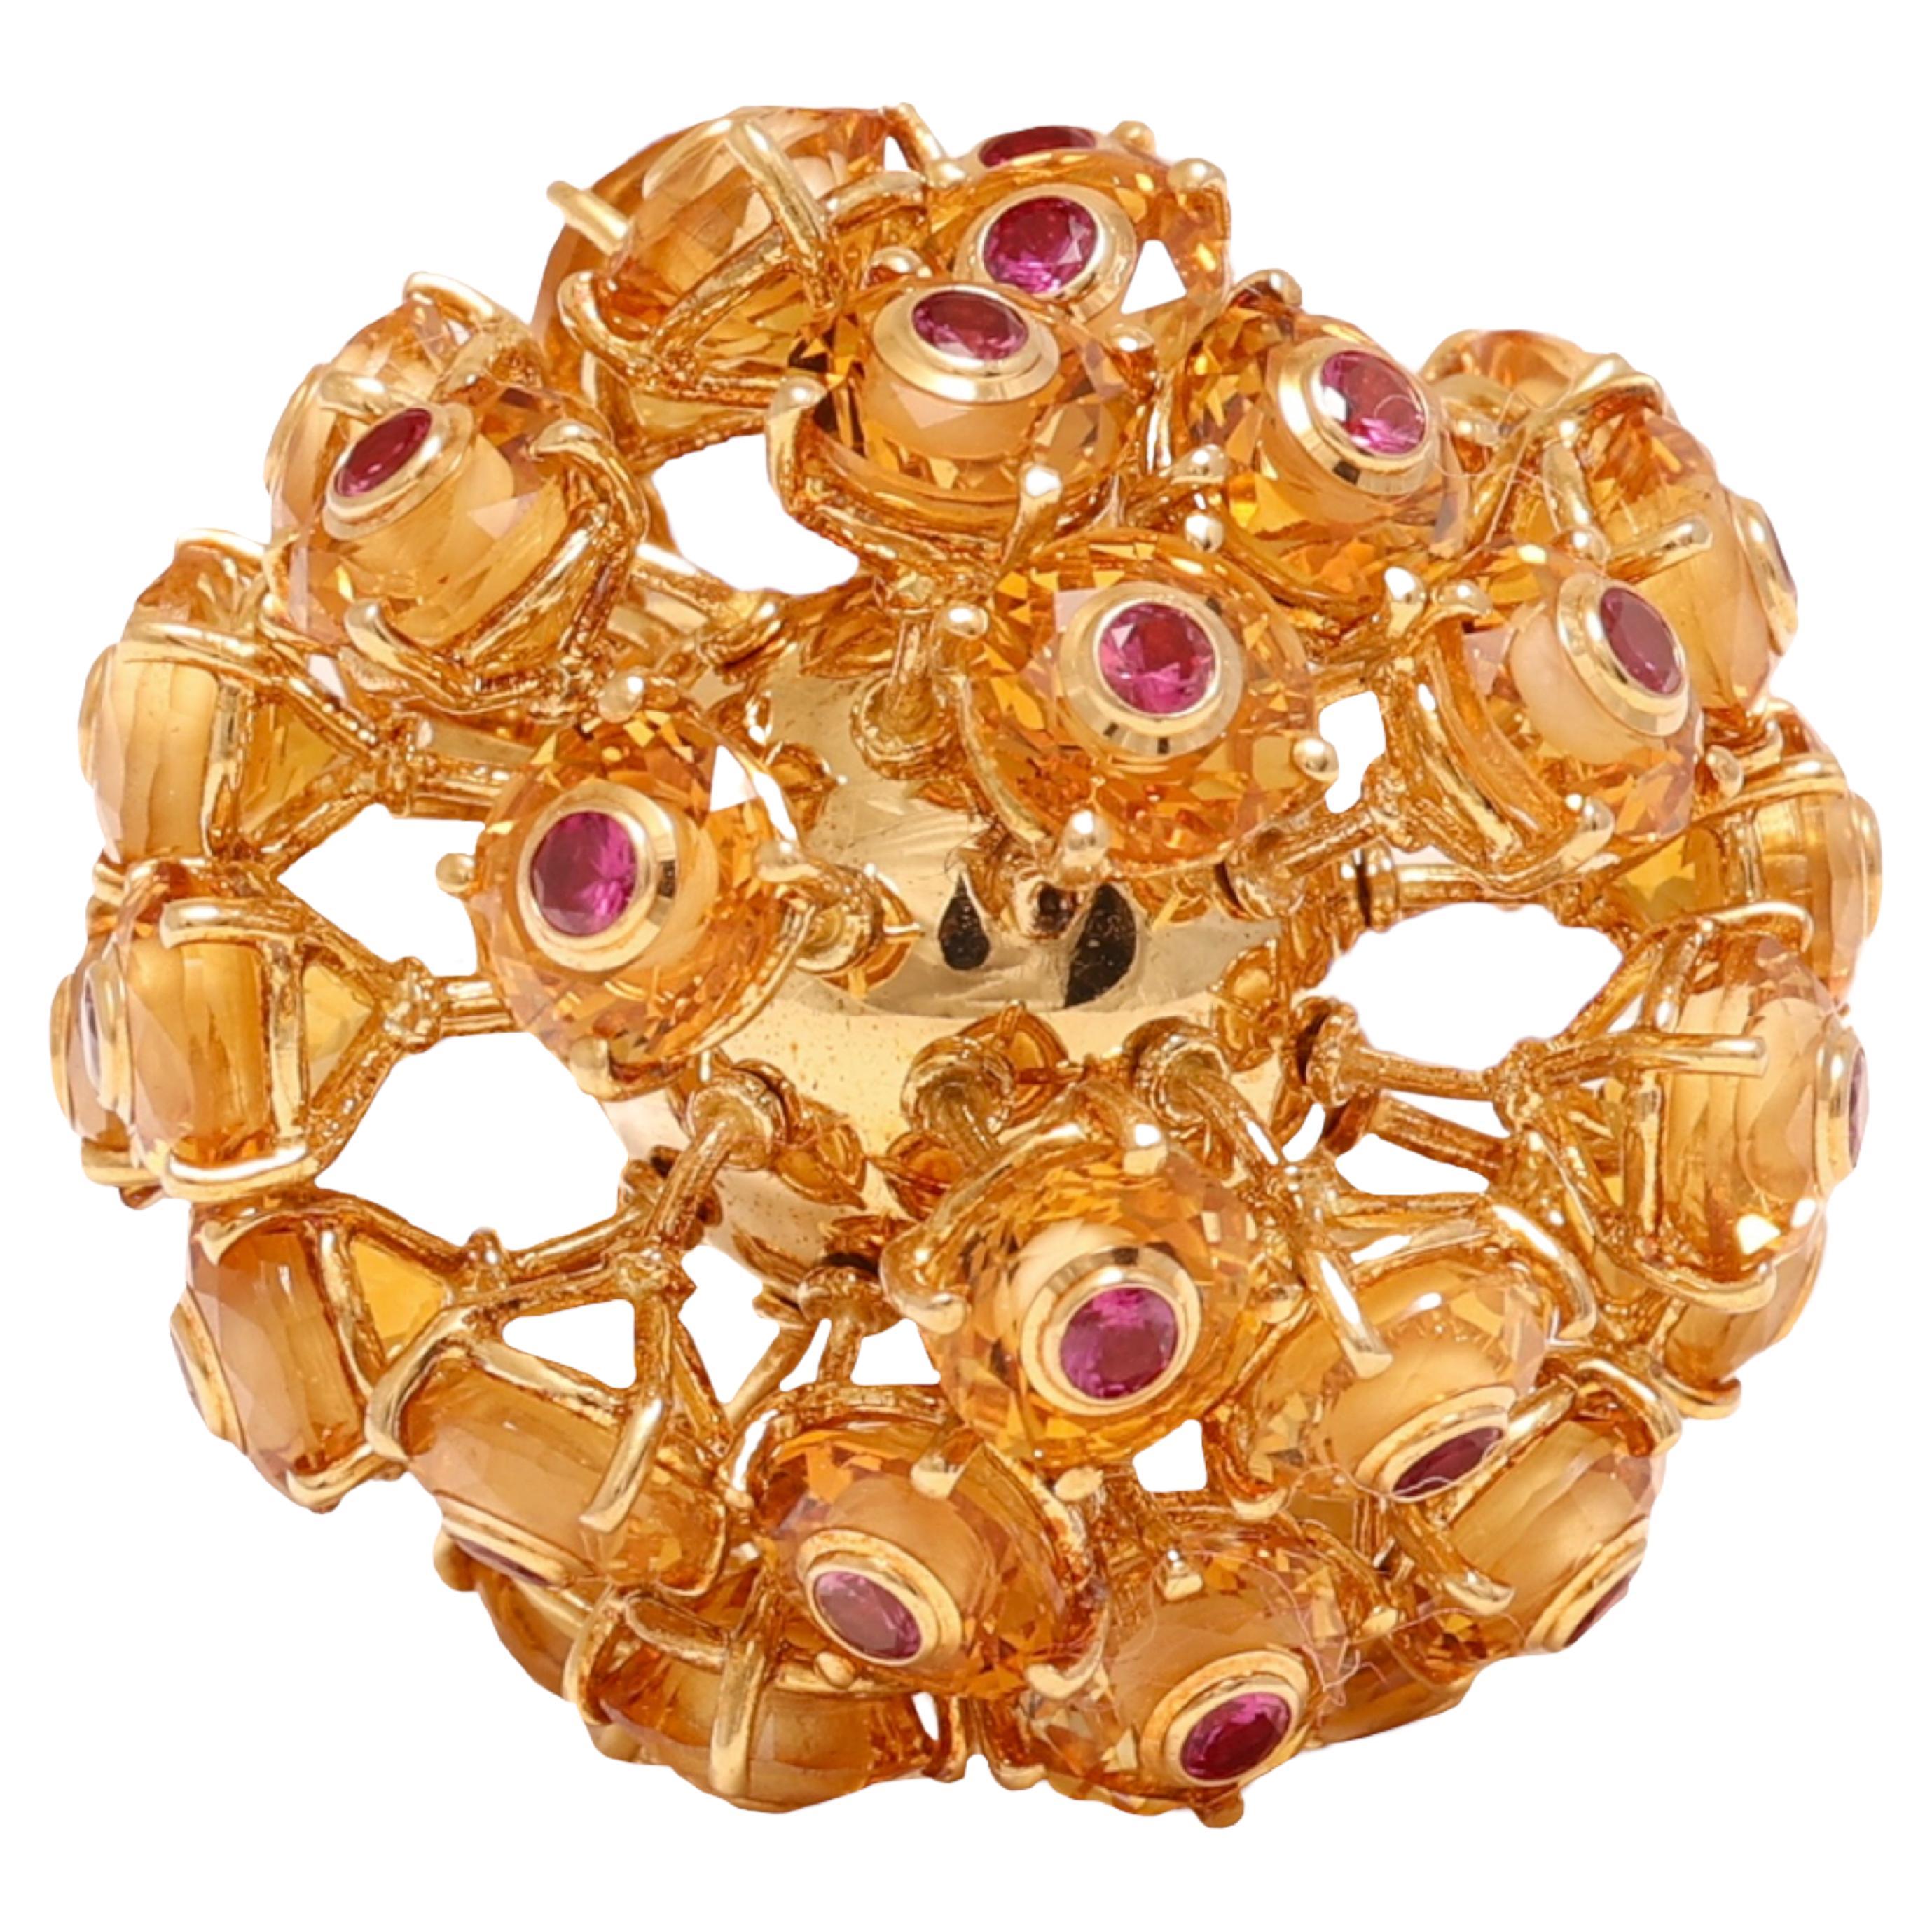  18 kt. Yellow Gold Ball of Moving 1.65 ct. Rubies and Citrine For Sale